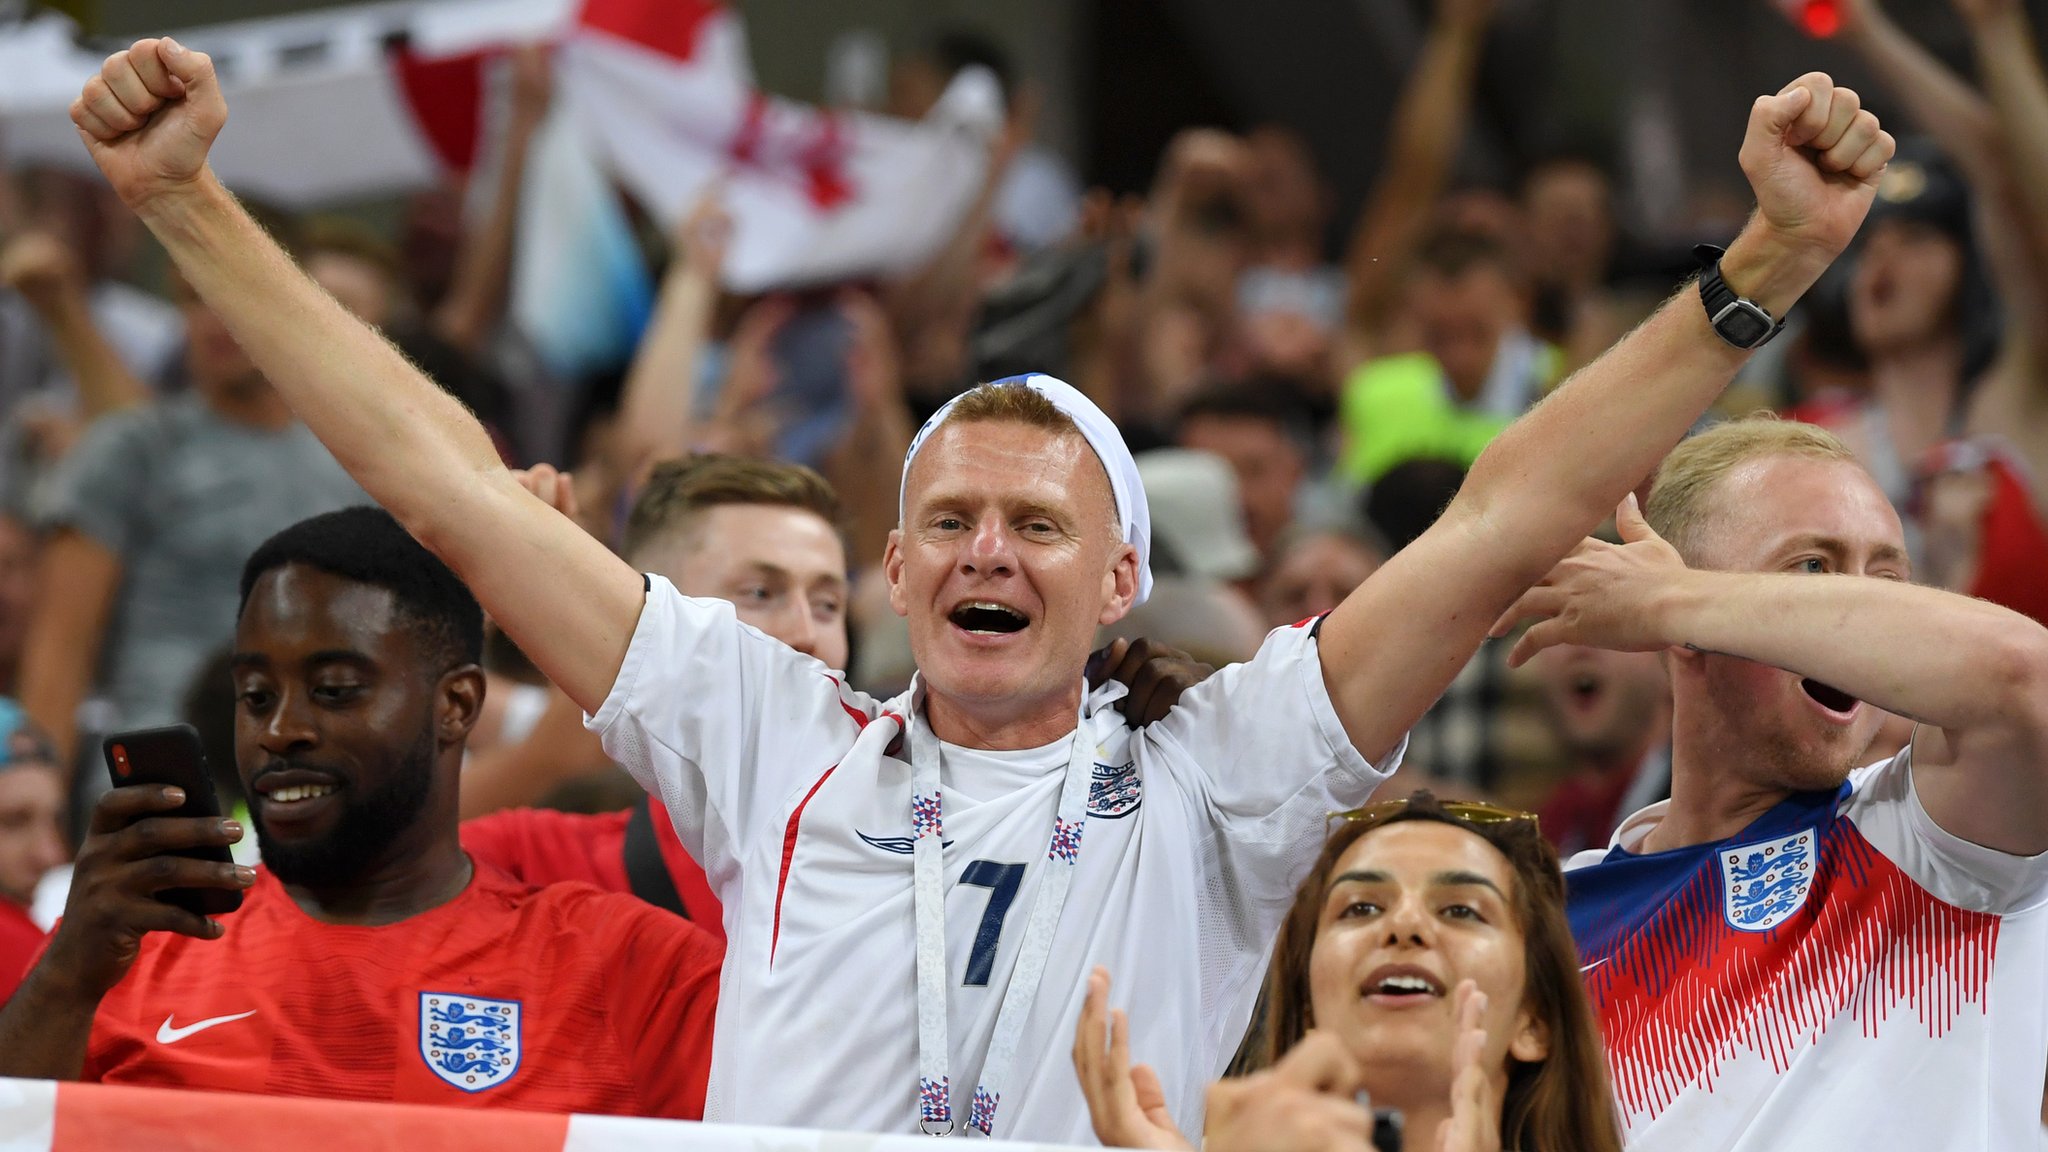 18.3m watched England beat Tunisia; record 3m streamed match